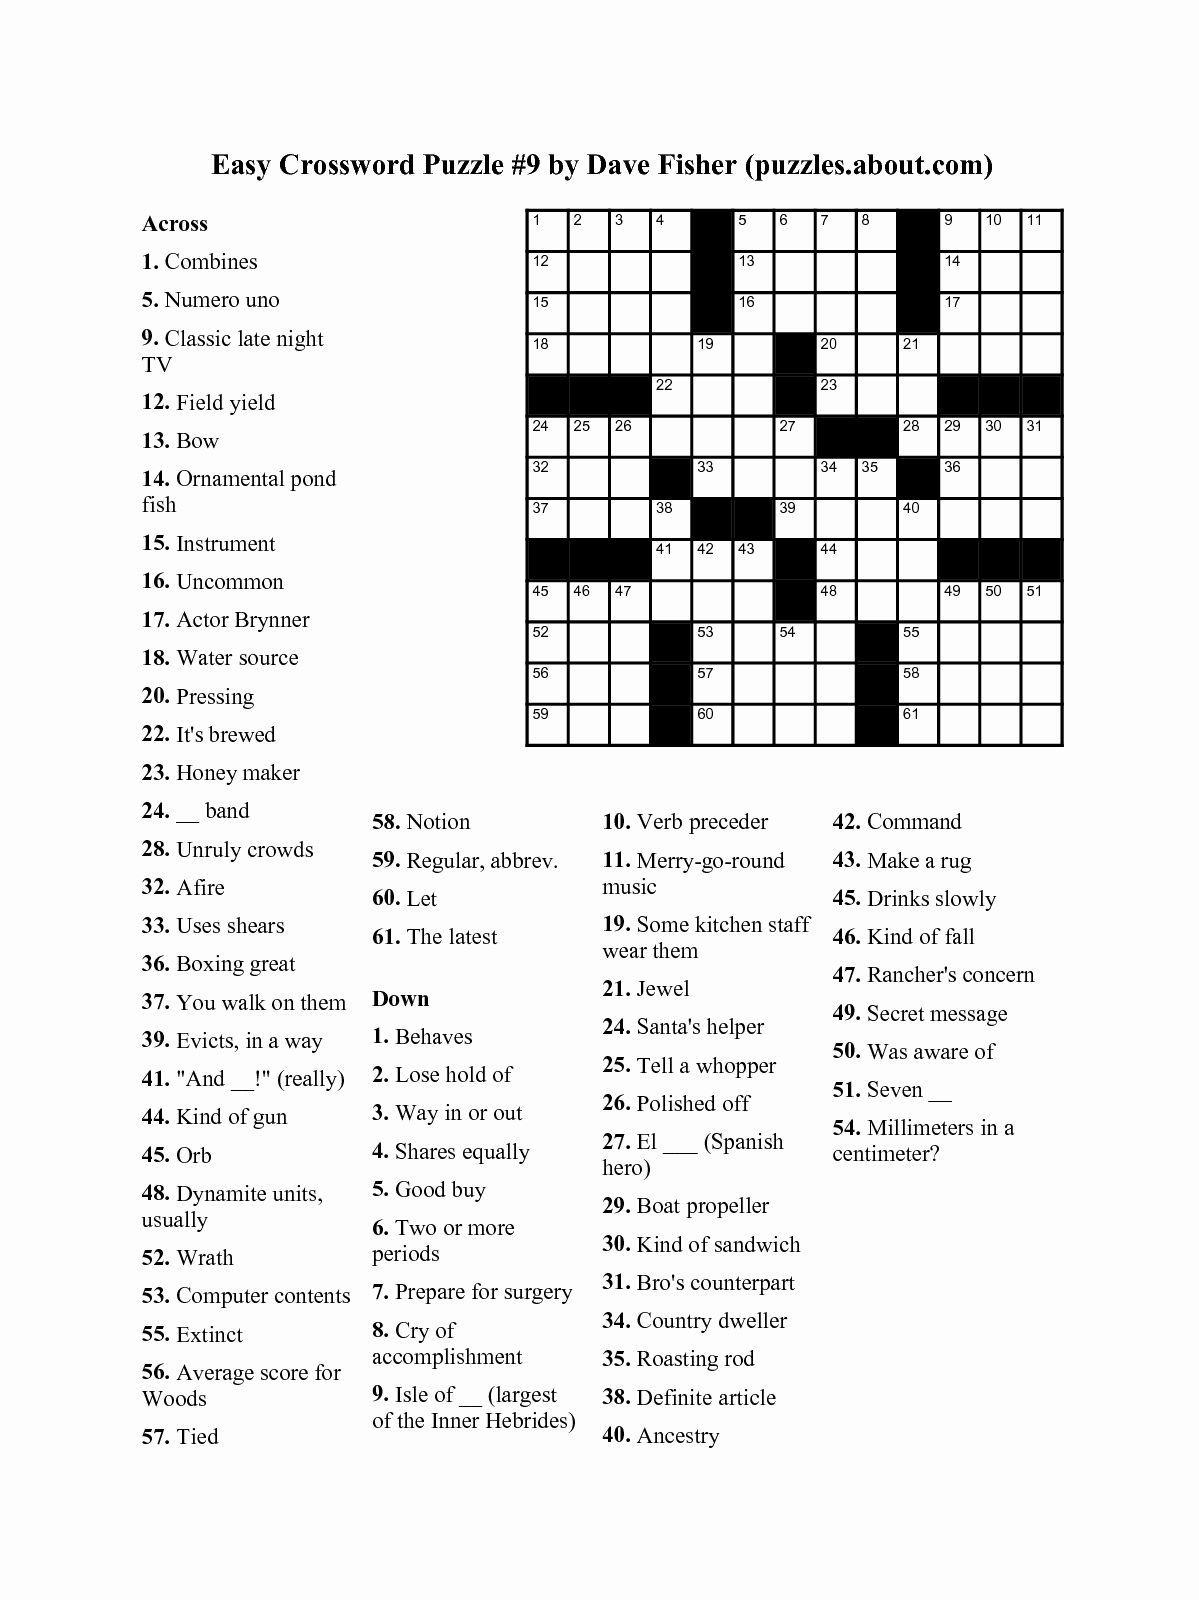 Free Daily Printable Crossword Puzzles Of Daily Crossword Puzzles - Printable Crossword Puzzles For Free